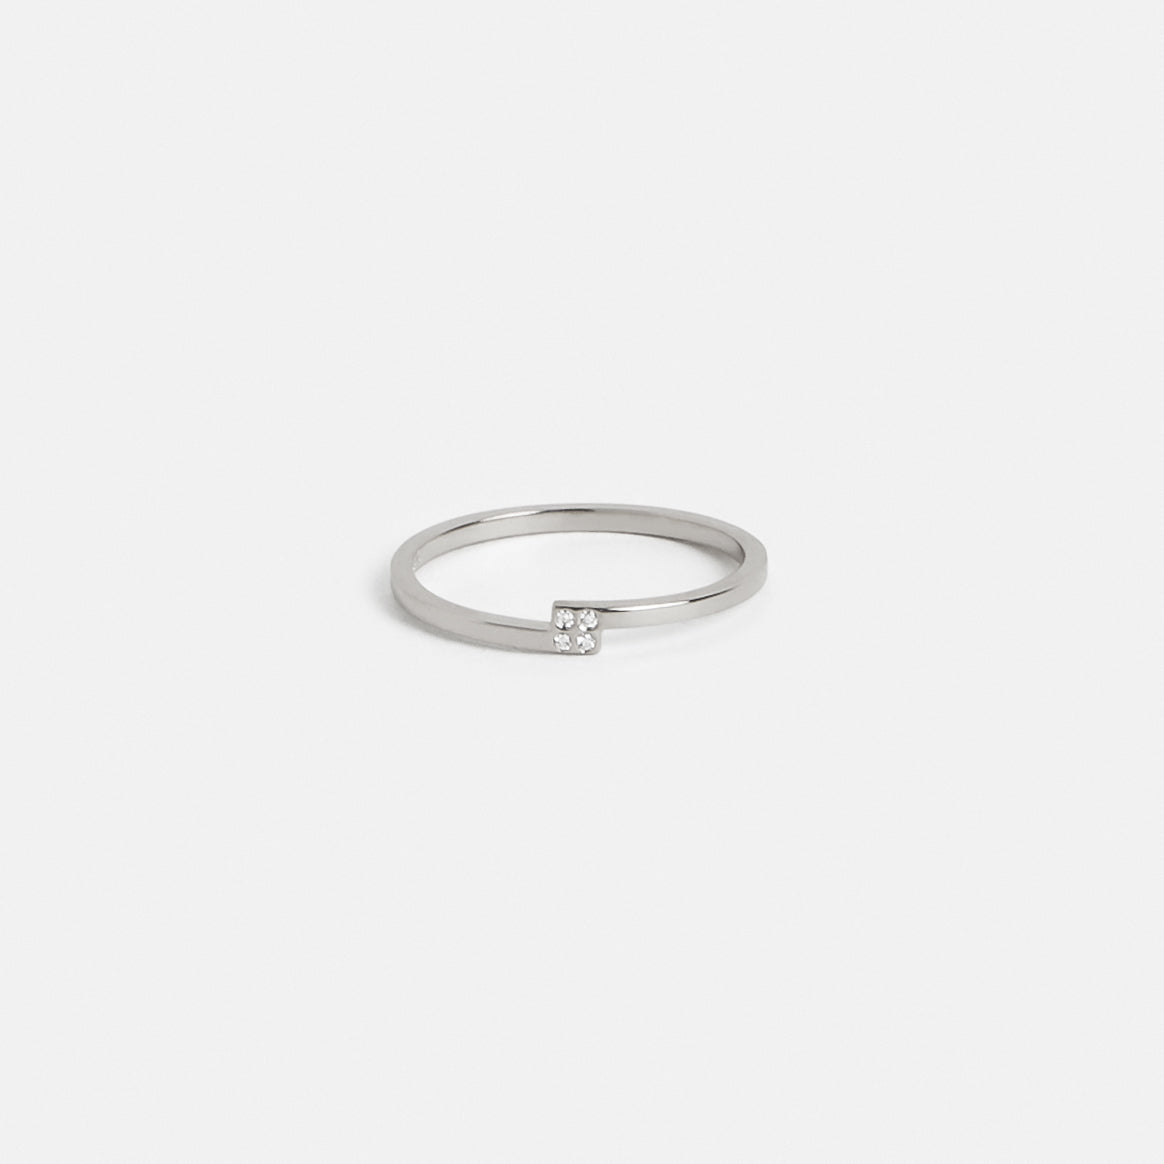 Piva Thin Ring in 14k White Gold set with White Diamonds By SHW Fine Jewelry NYC